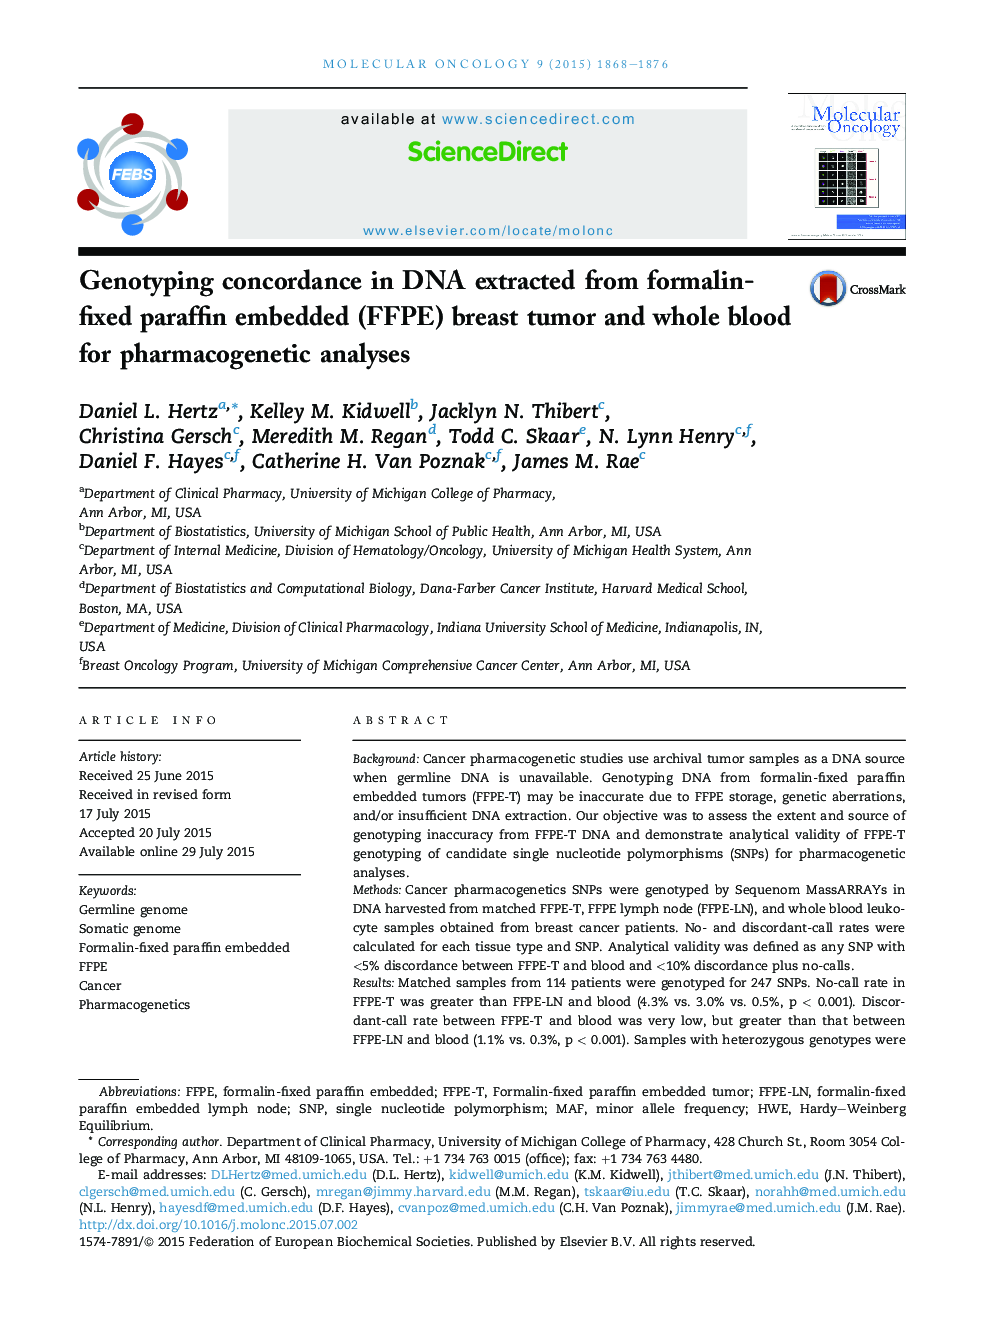 Genotyping concordance in DNA extracted from formalin-fixed paraffin embedded (FFPE) breast tumor and whole blood for pharmacogenetic analyses